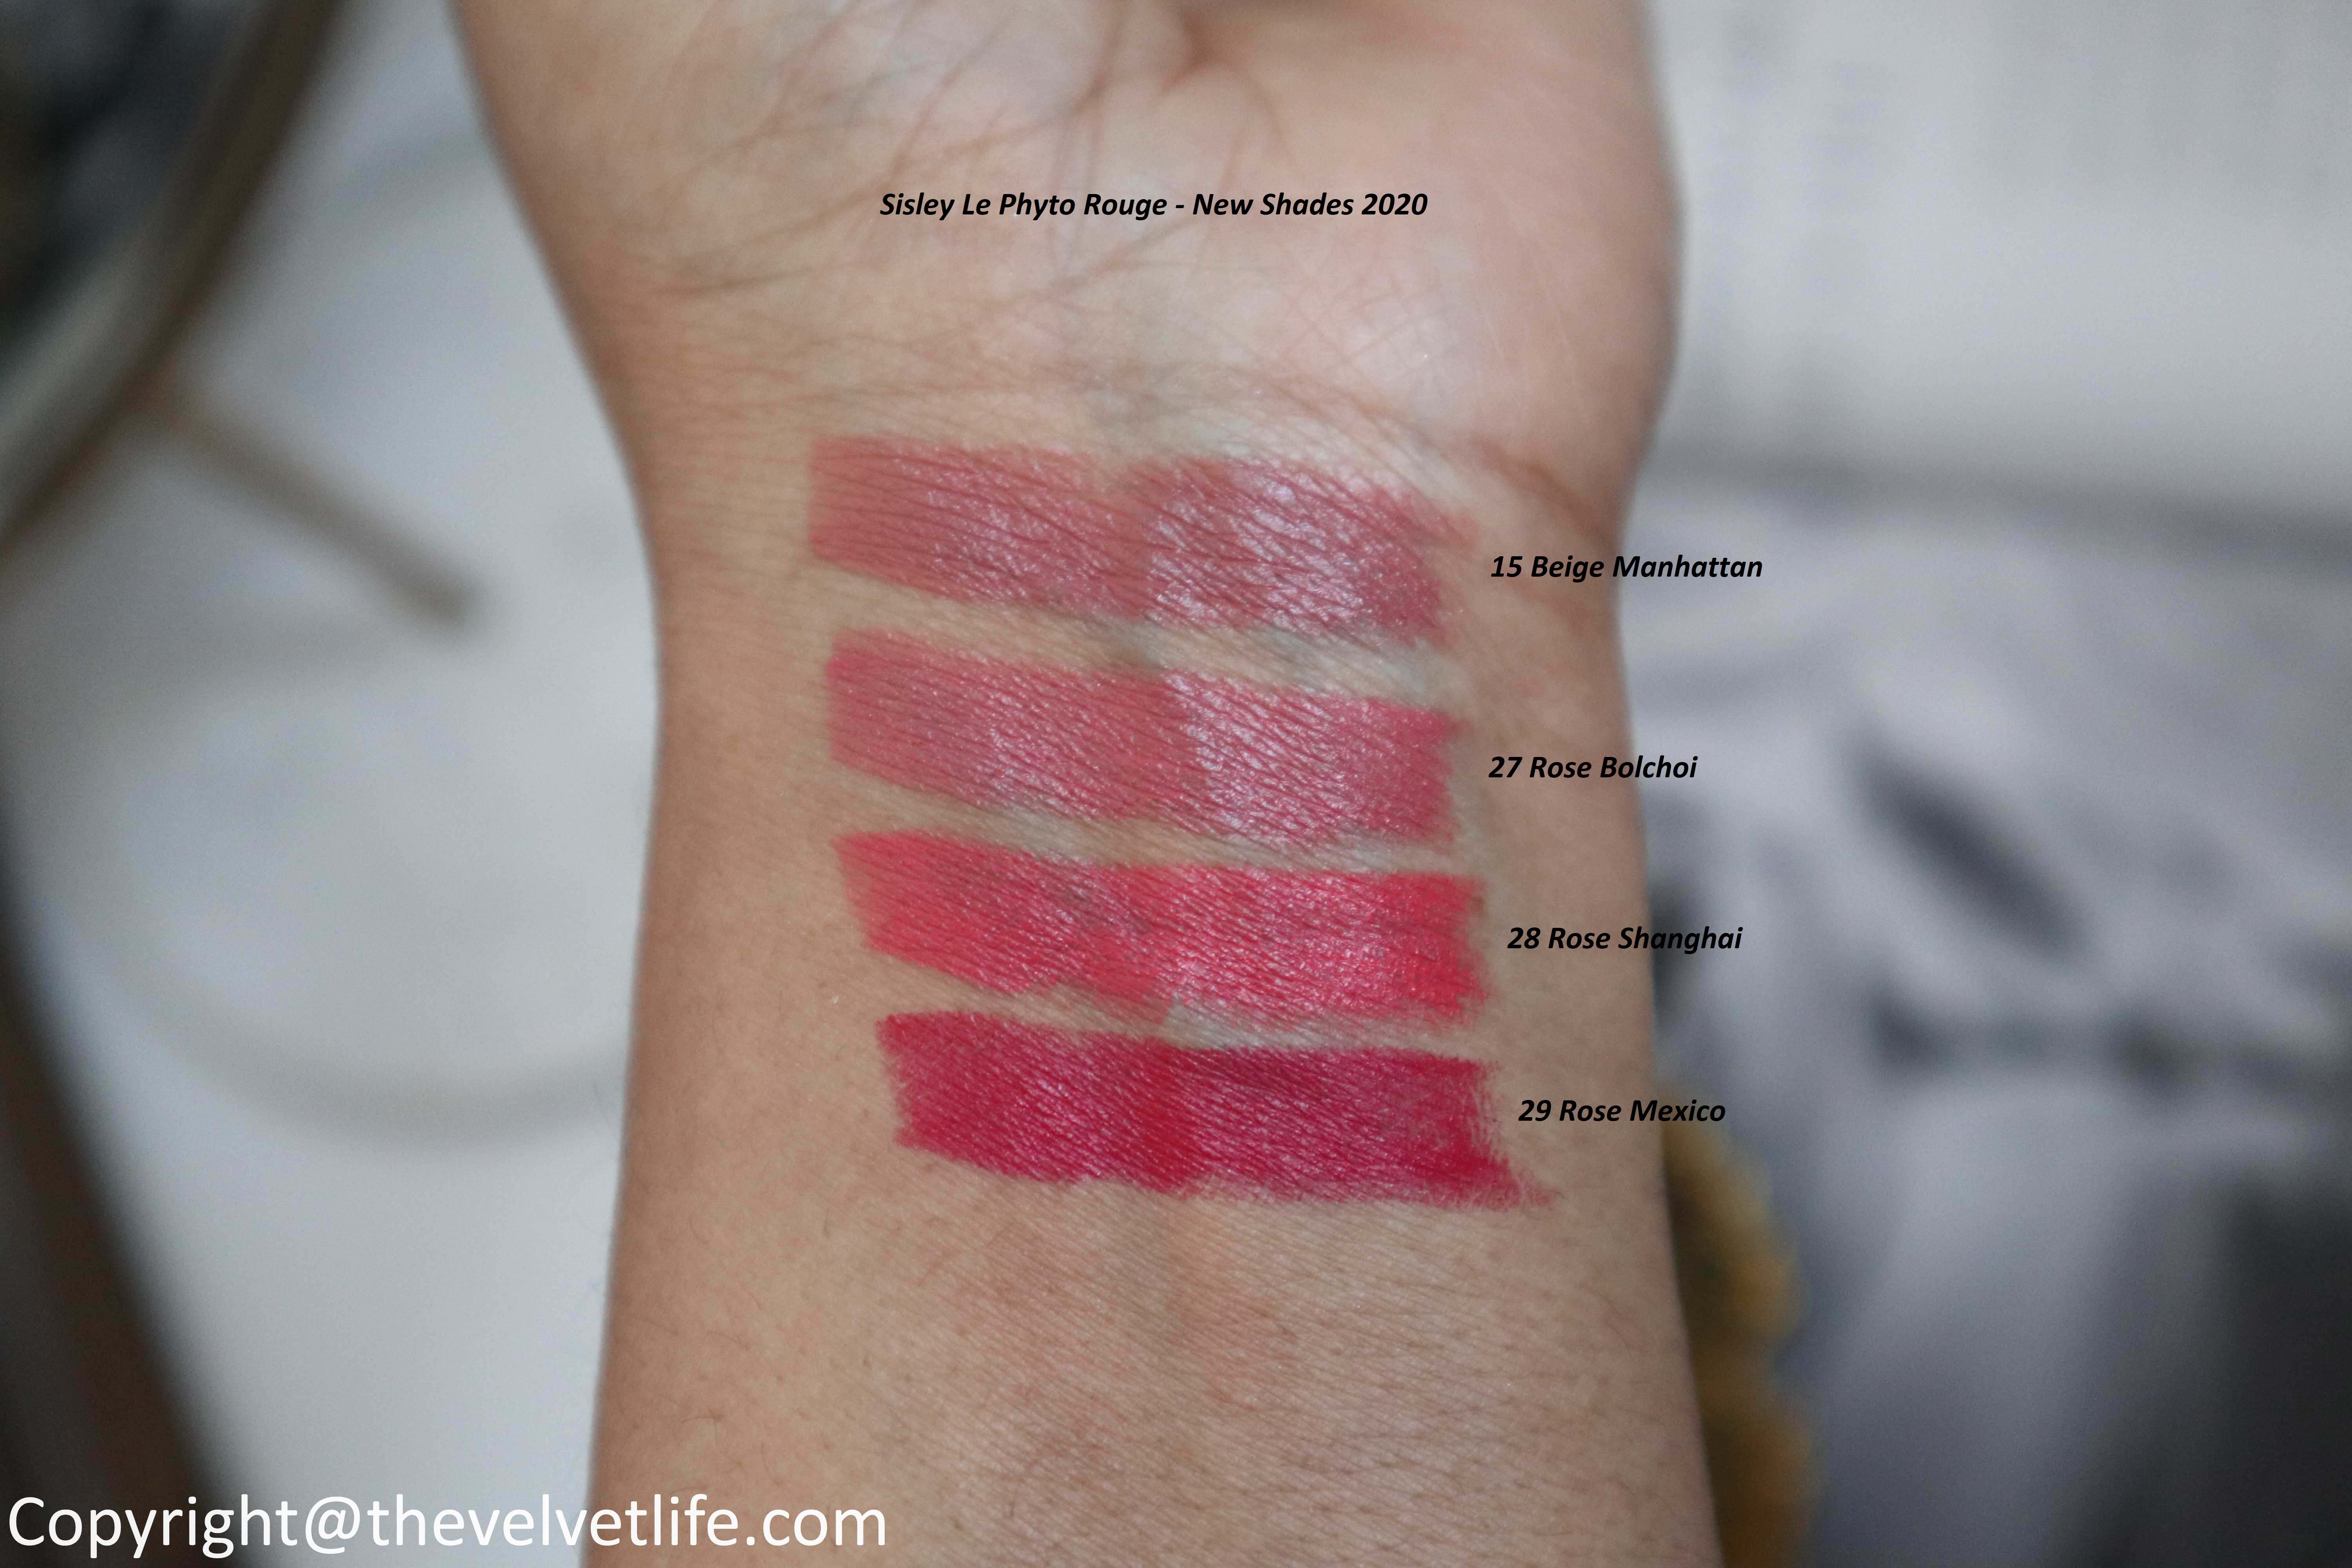 Sisley Le Phyto Rouge New review swatches 15 Beige Manhattan, 27 Rose Bolchoi, 28 Rose Shanghai, 29 Rose Mexico